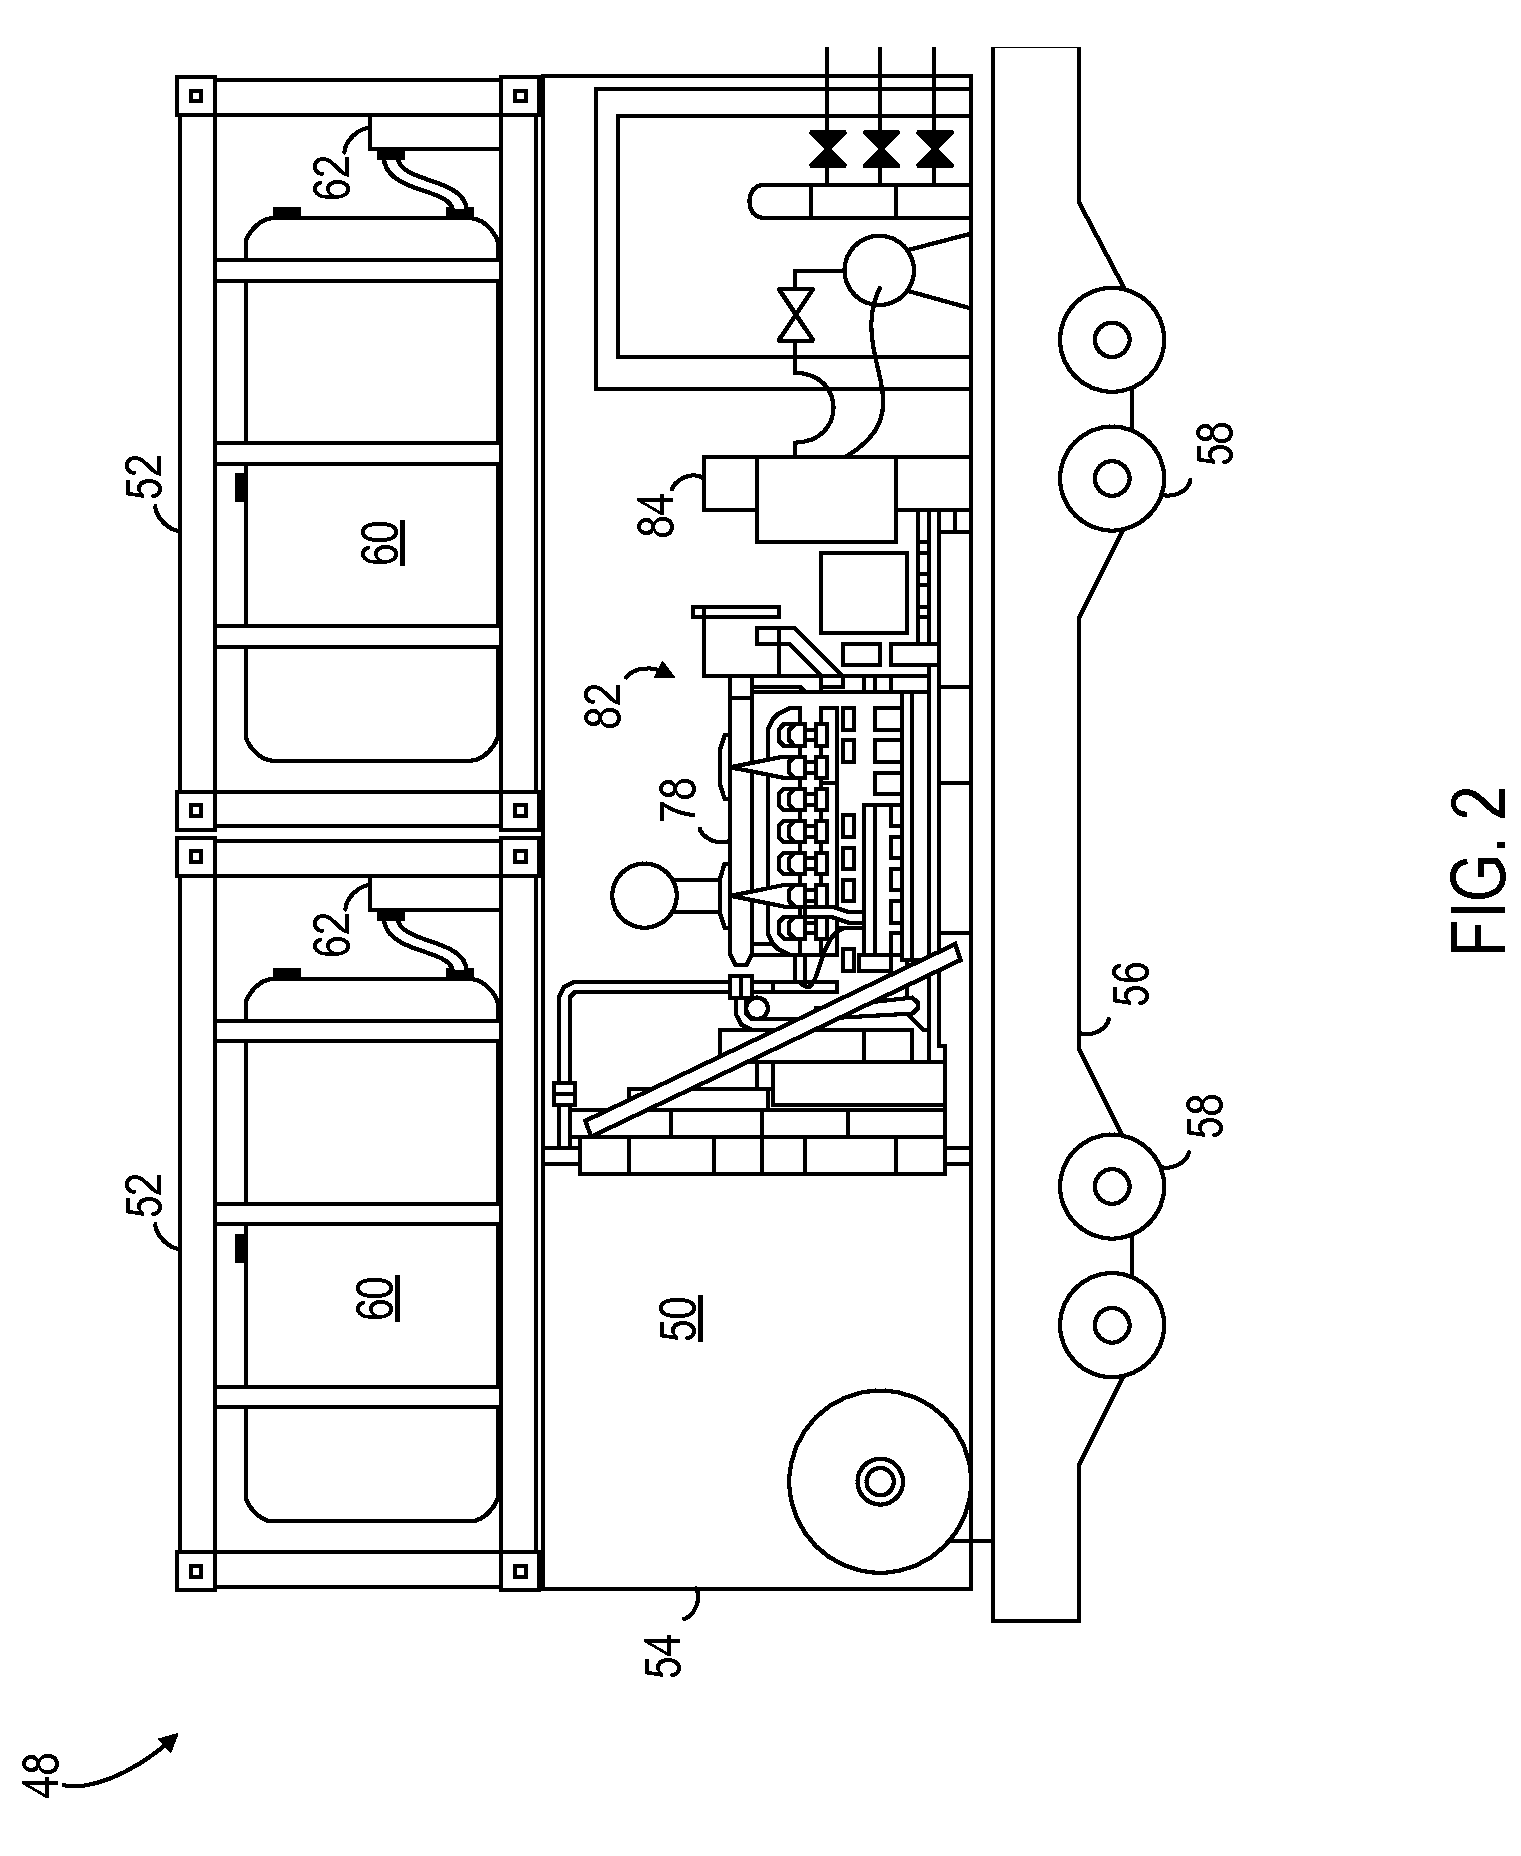 Auxiliary power unit assembly and method of use